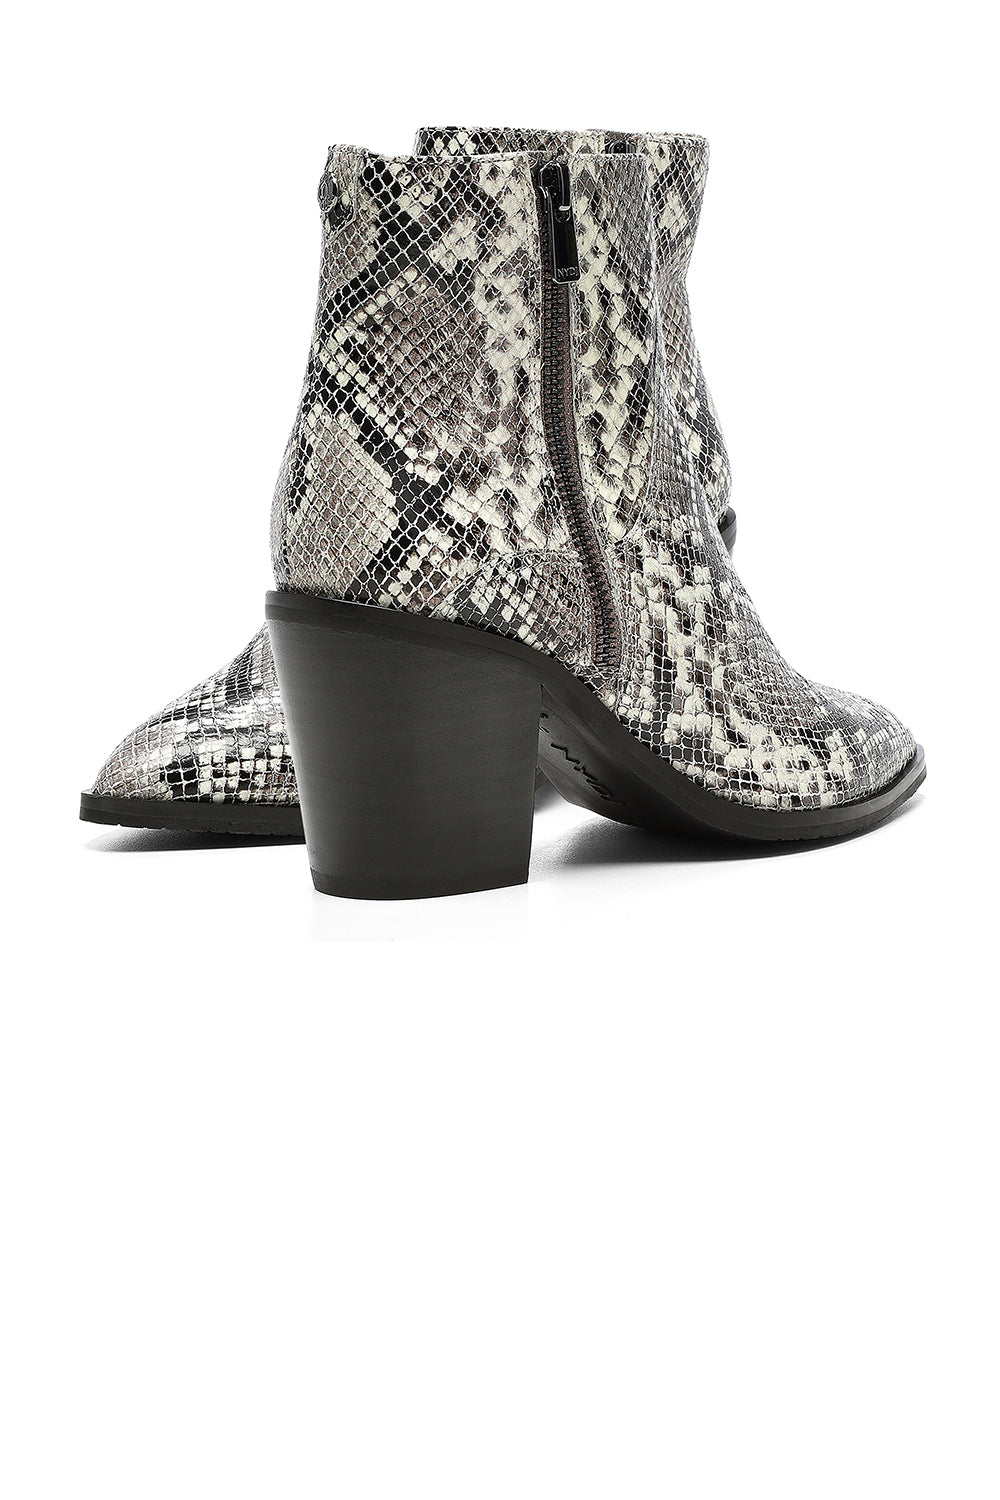 NYDJ Wendy Booties In Snake Print Leather - Feather